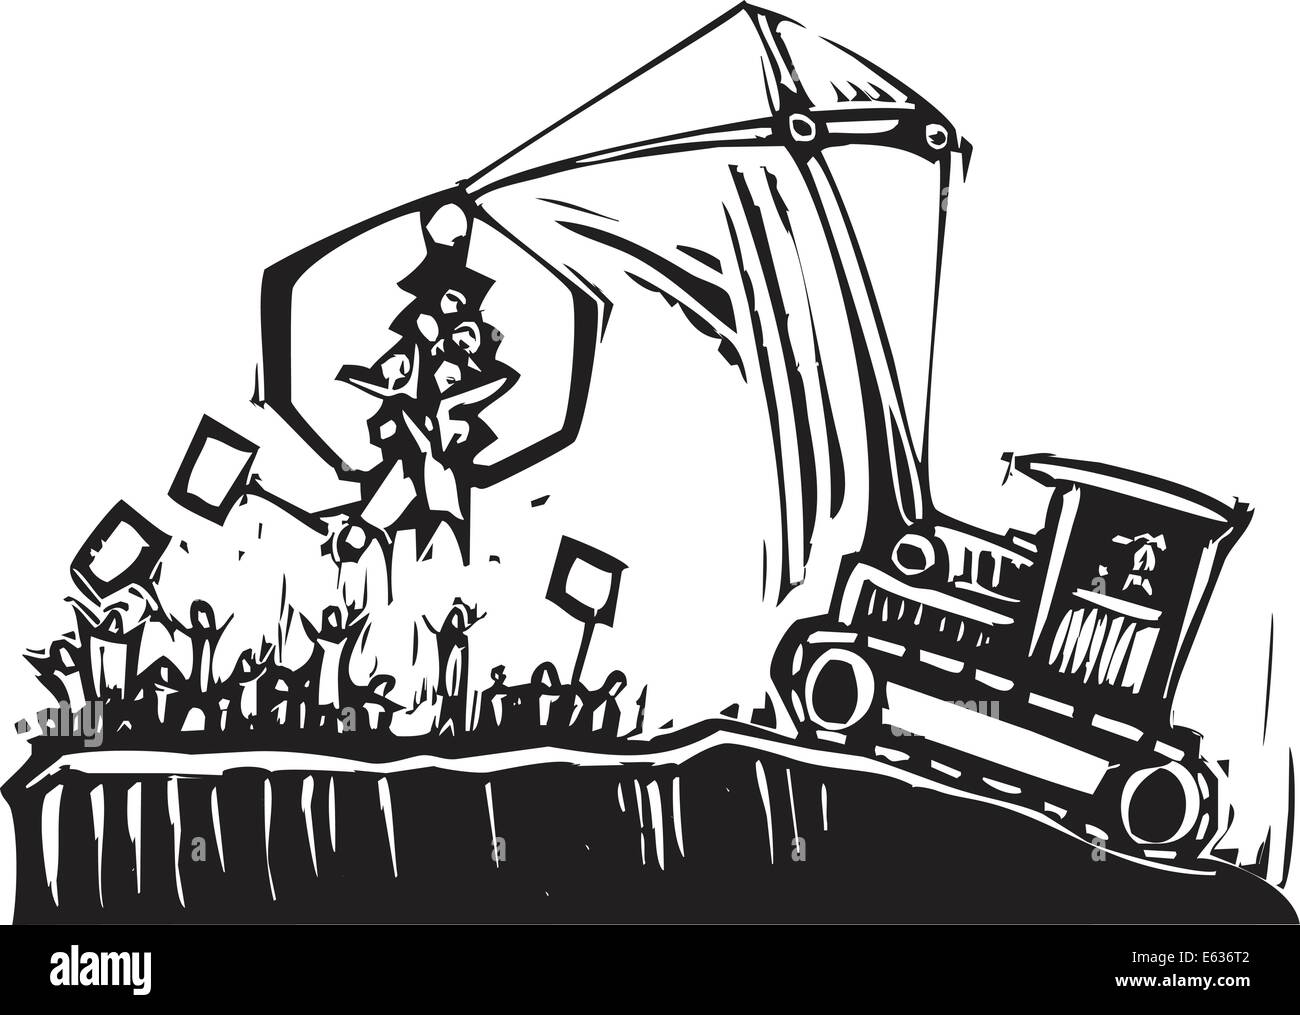 a protest being broken up by a crane Stock Vector